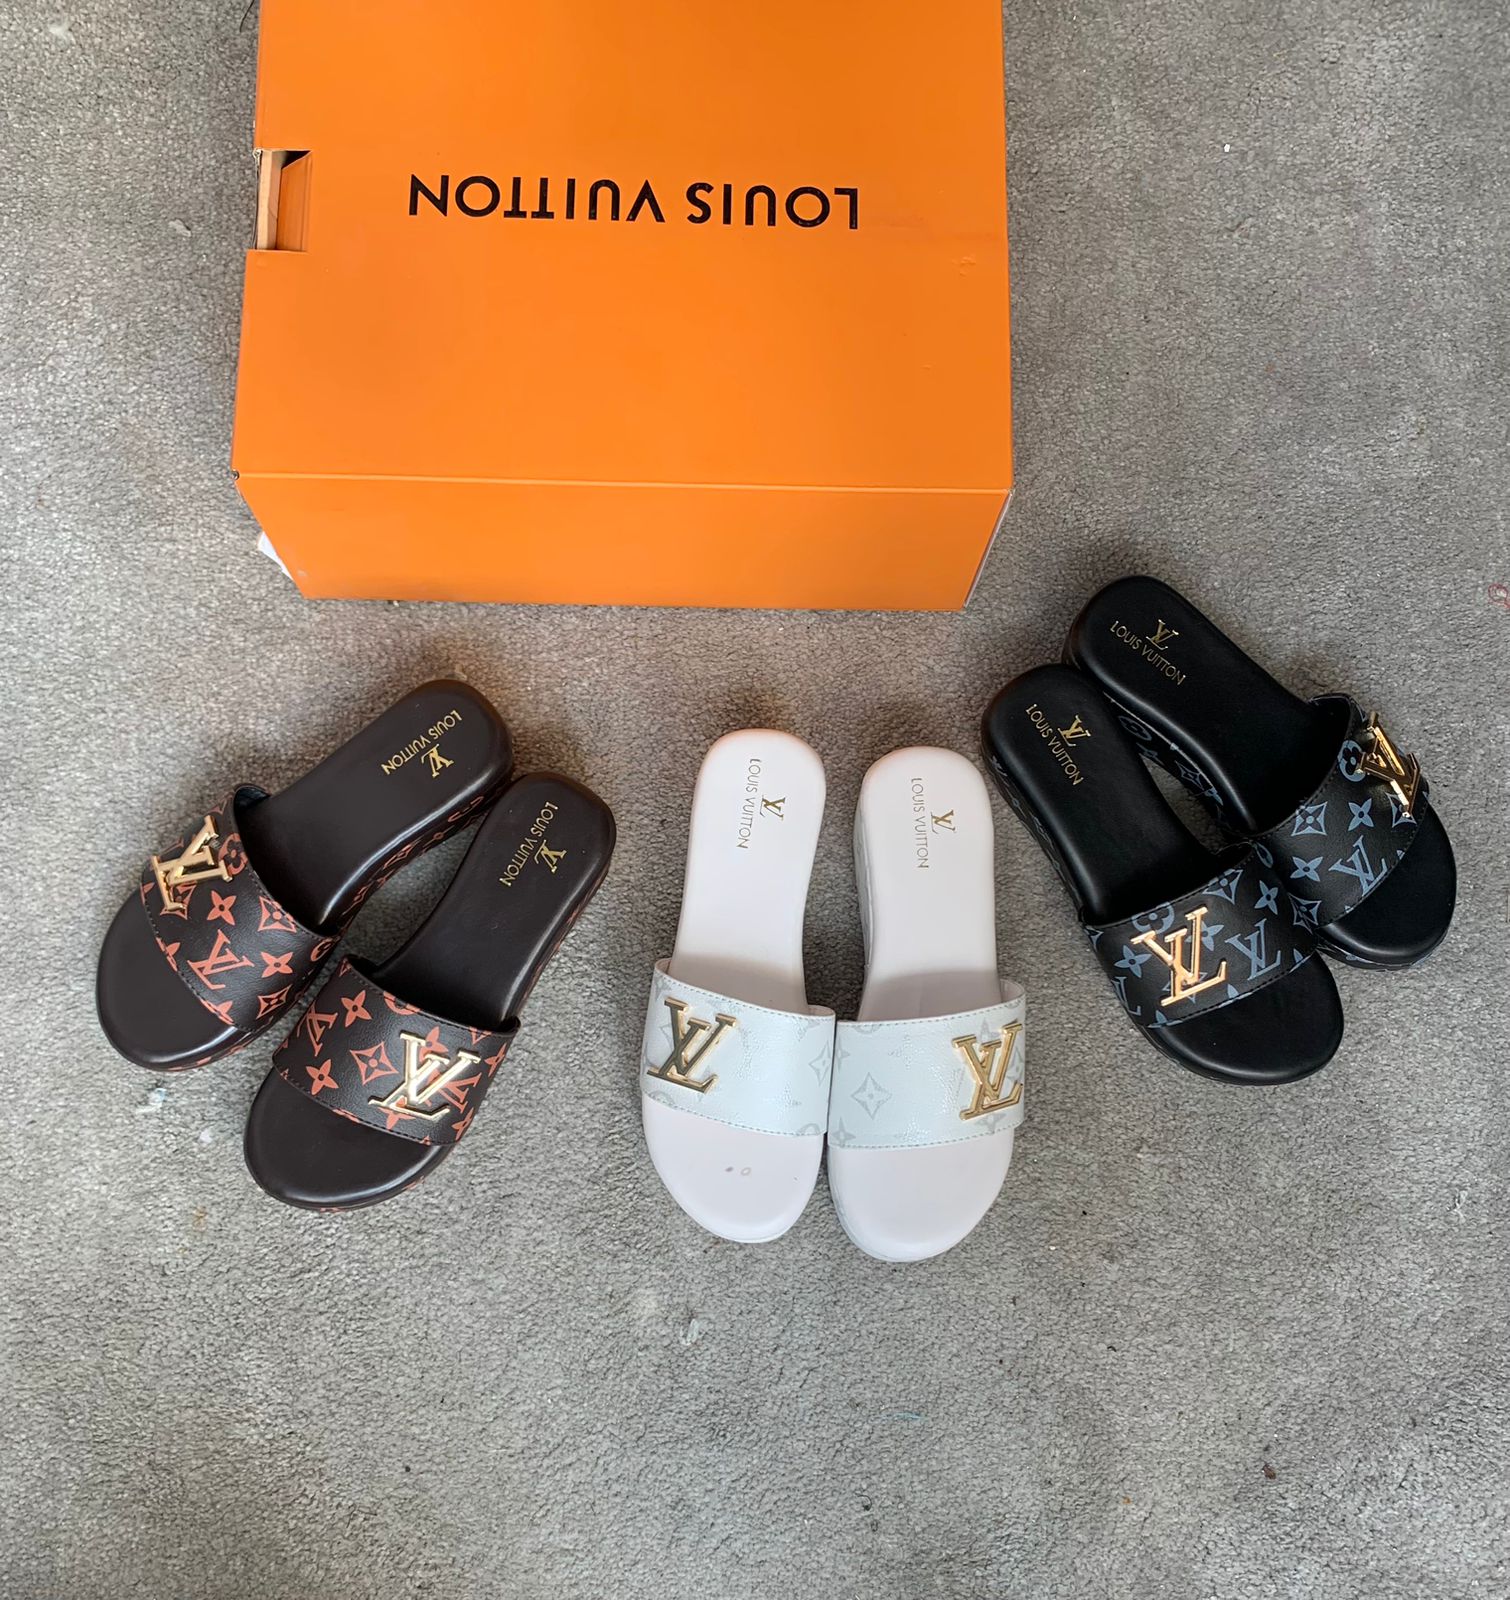 FIRST COPY HIGH QUALITY SANDLES FOR WOMEN BY LOUIS VUITTON